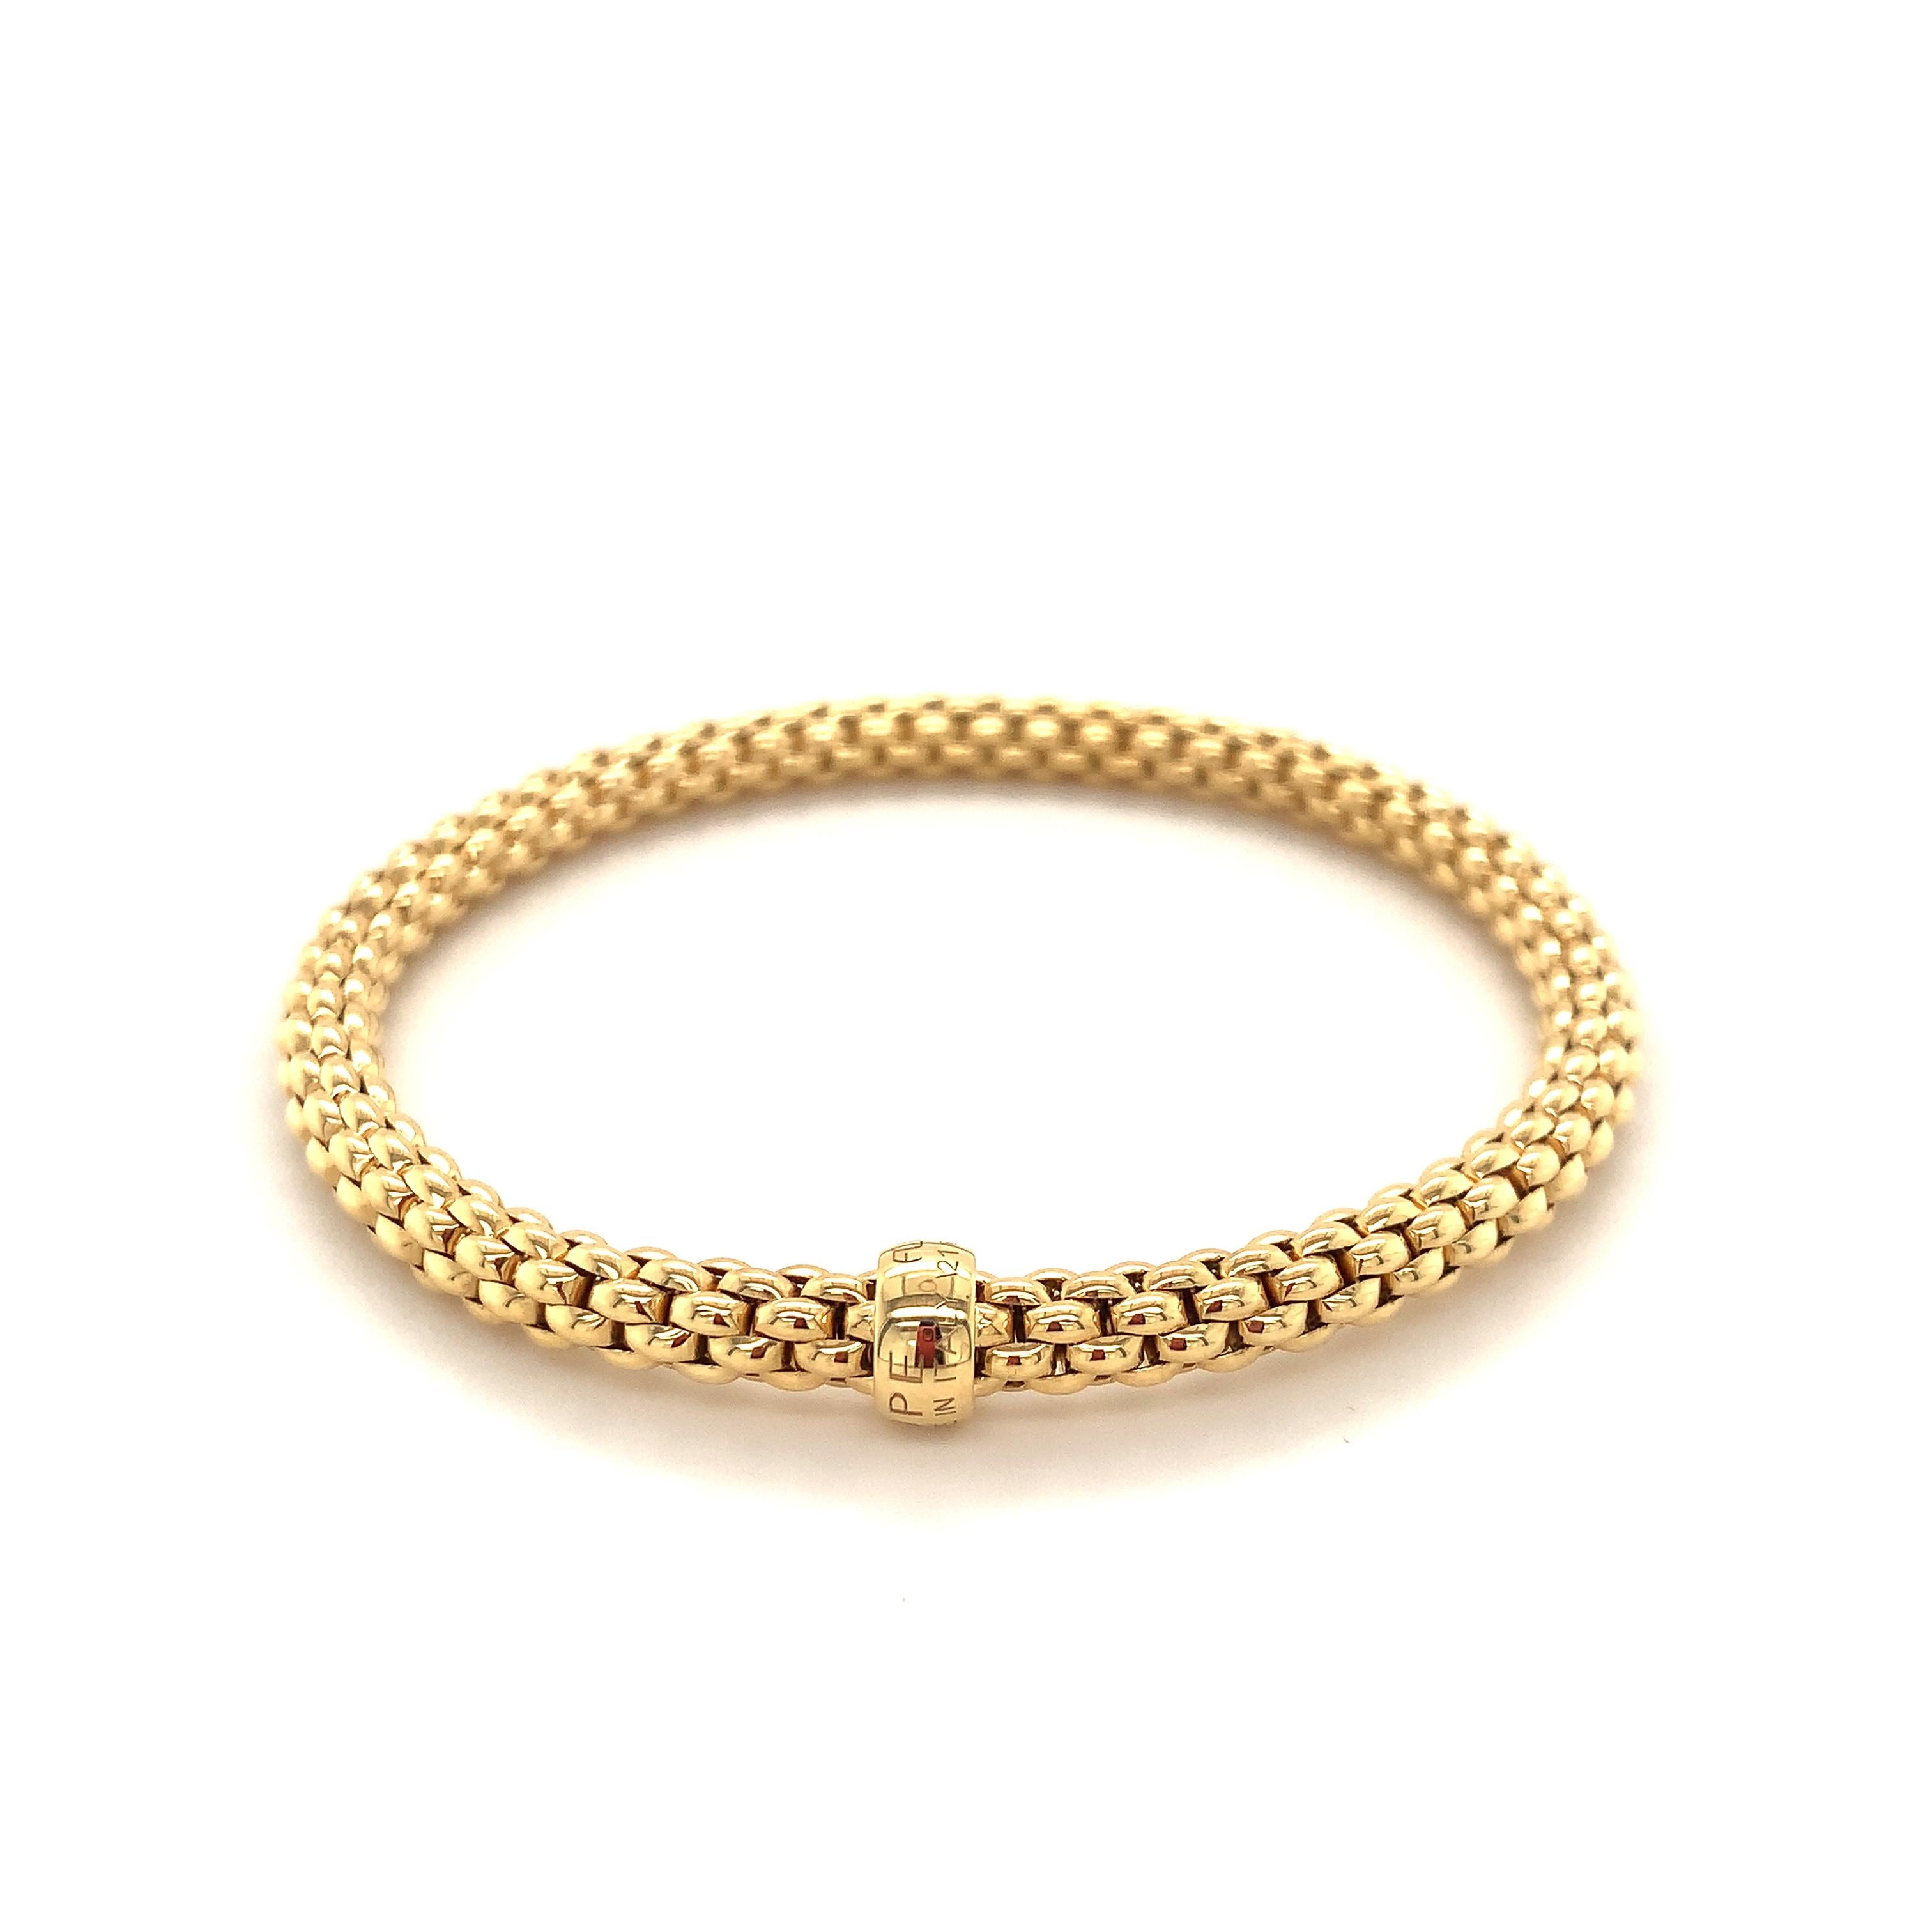 Fope Bracelet 18K Yellow Gold with Solid Gold Rondel 620BM-G 6